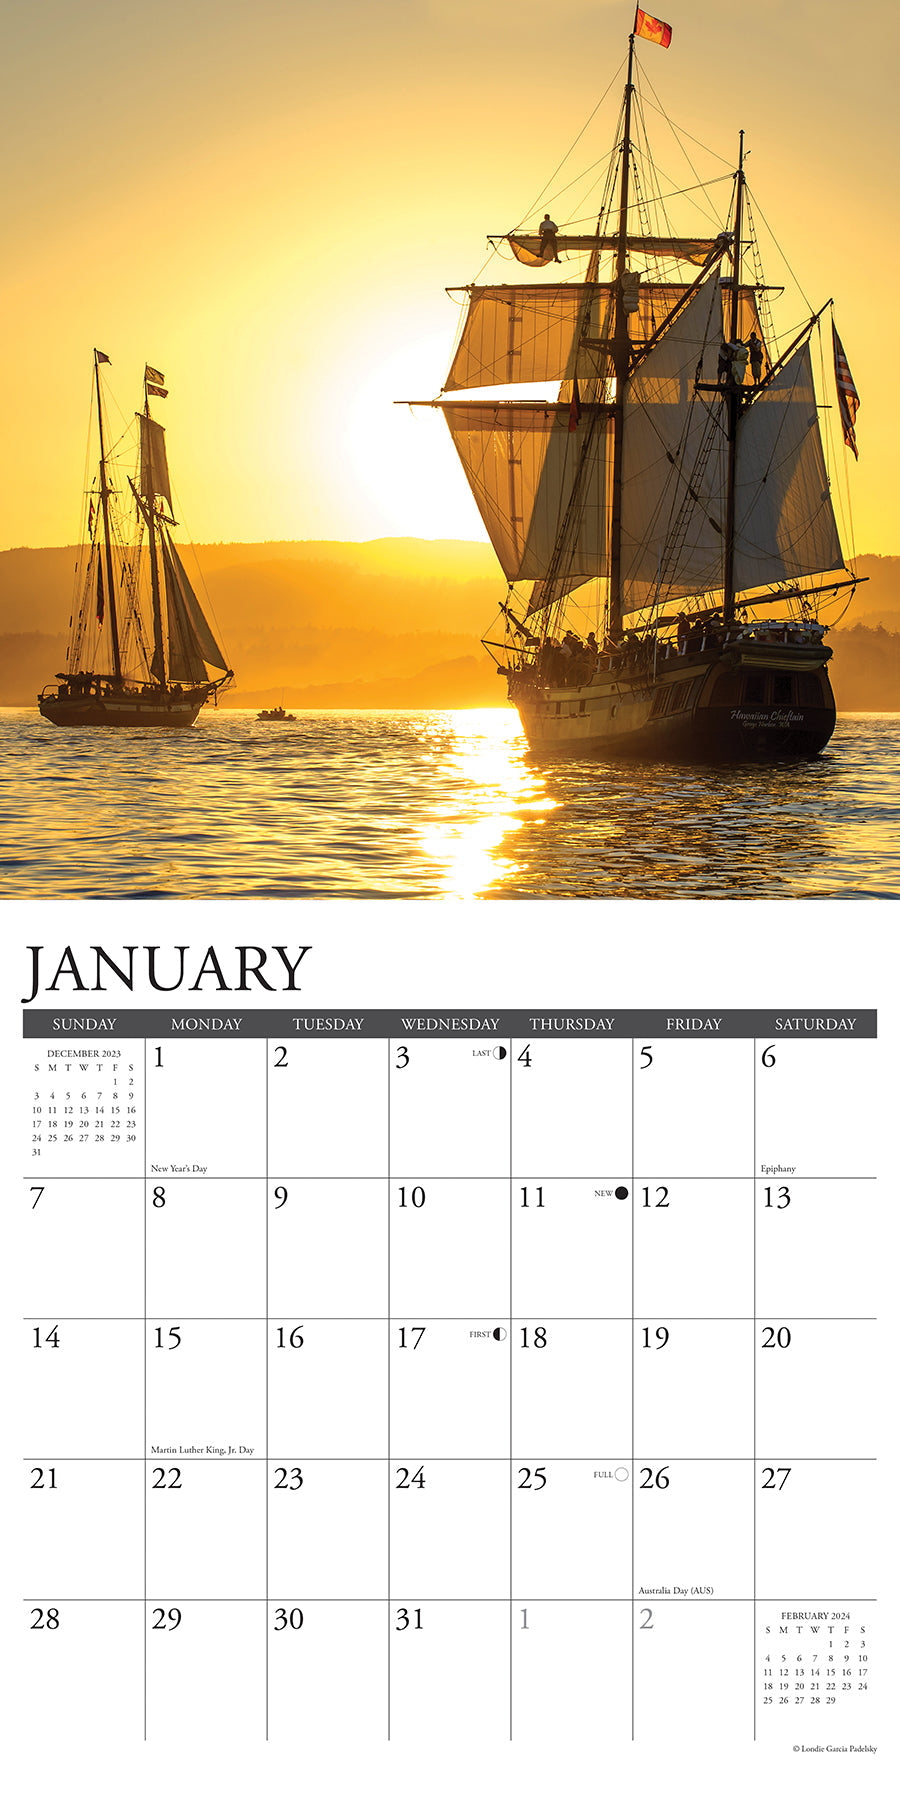 2024 Tall Ships (by Willow Creek) - Square Wall Calendar